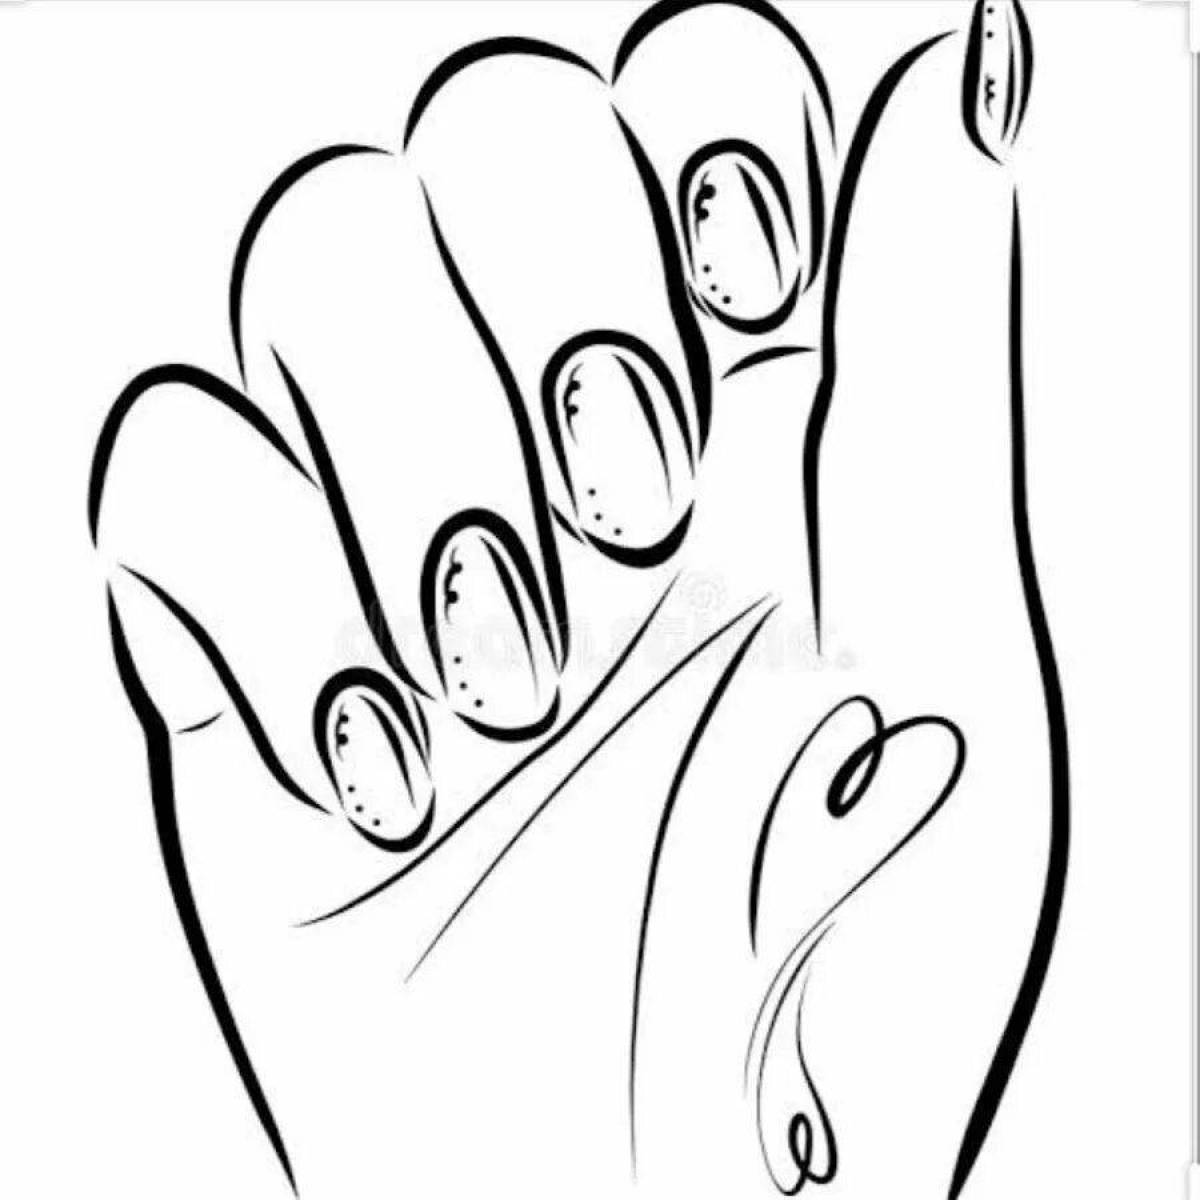 Blessed female hand coloring page